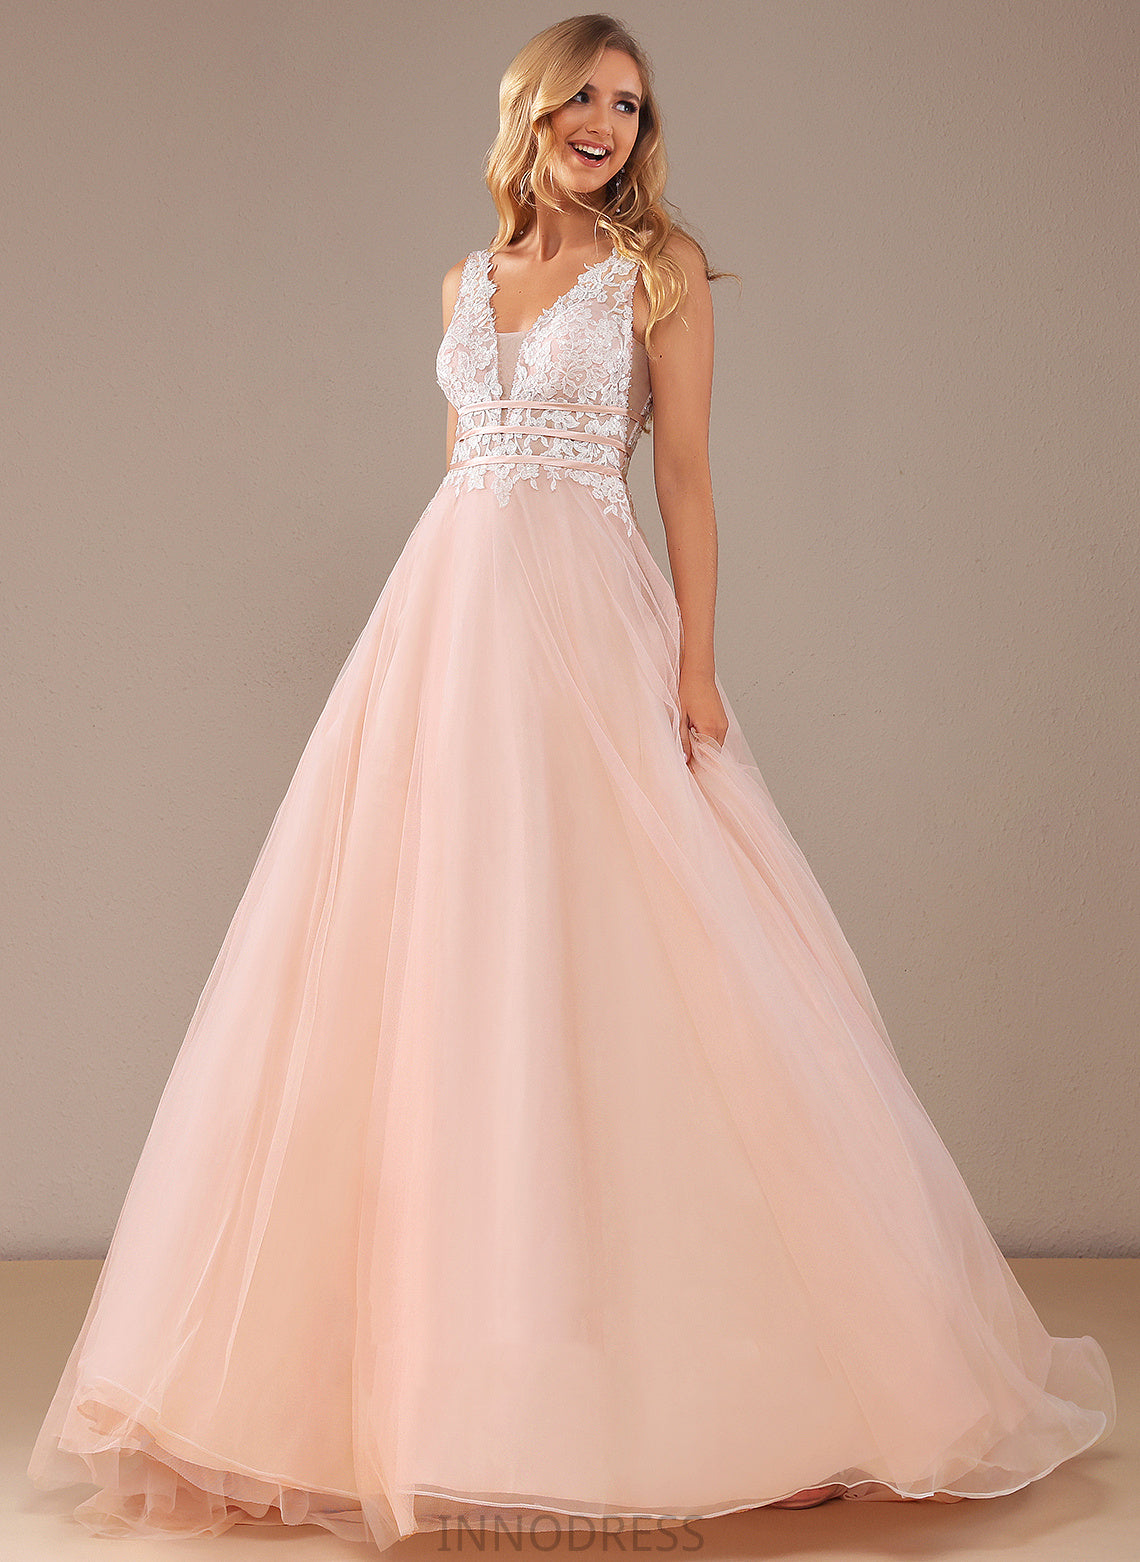 Dress Wedding V-neck Lace Court Wedding Dresses Train Ciara Lace Sequins With Ball-Gown/Princess Tulle